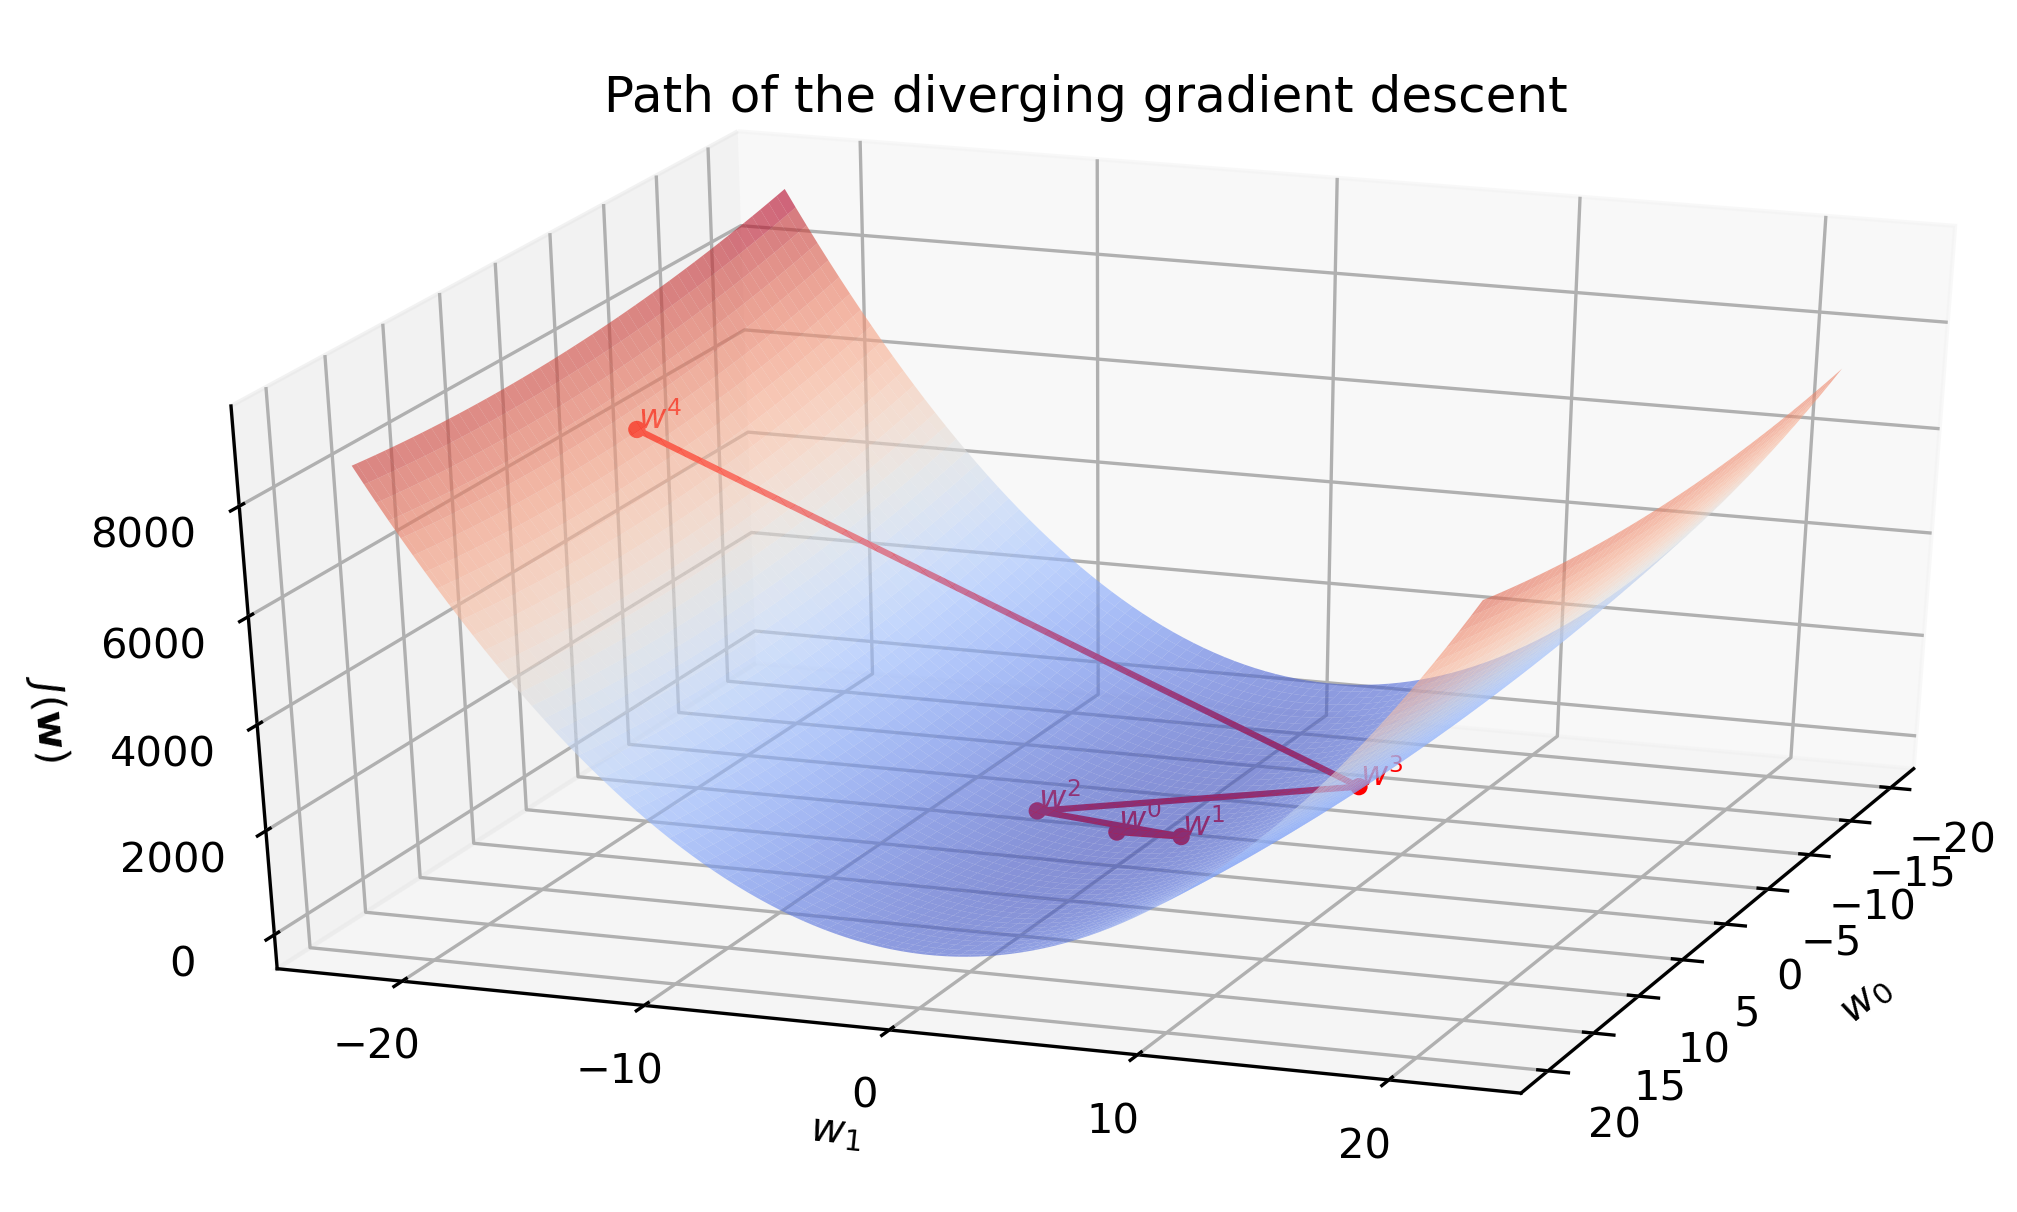 Guide to Gradient Descent Algorithm: A Comprehensive implementation in  Python - Machine Learning Space